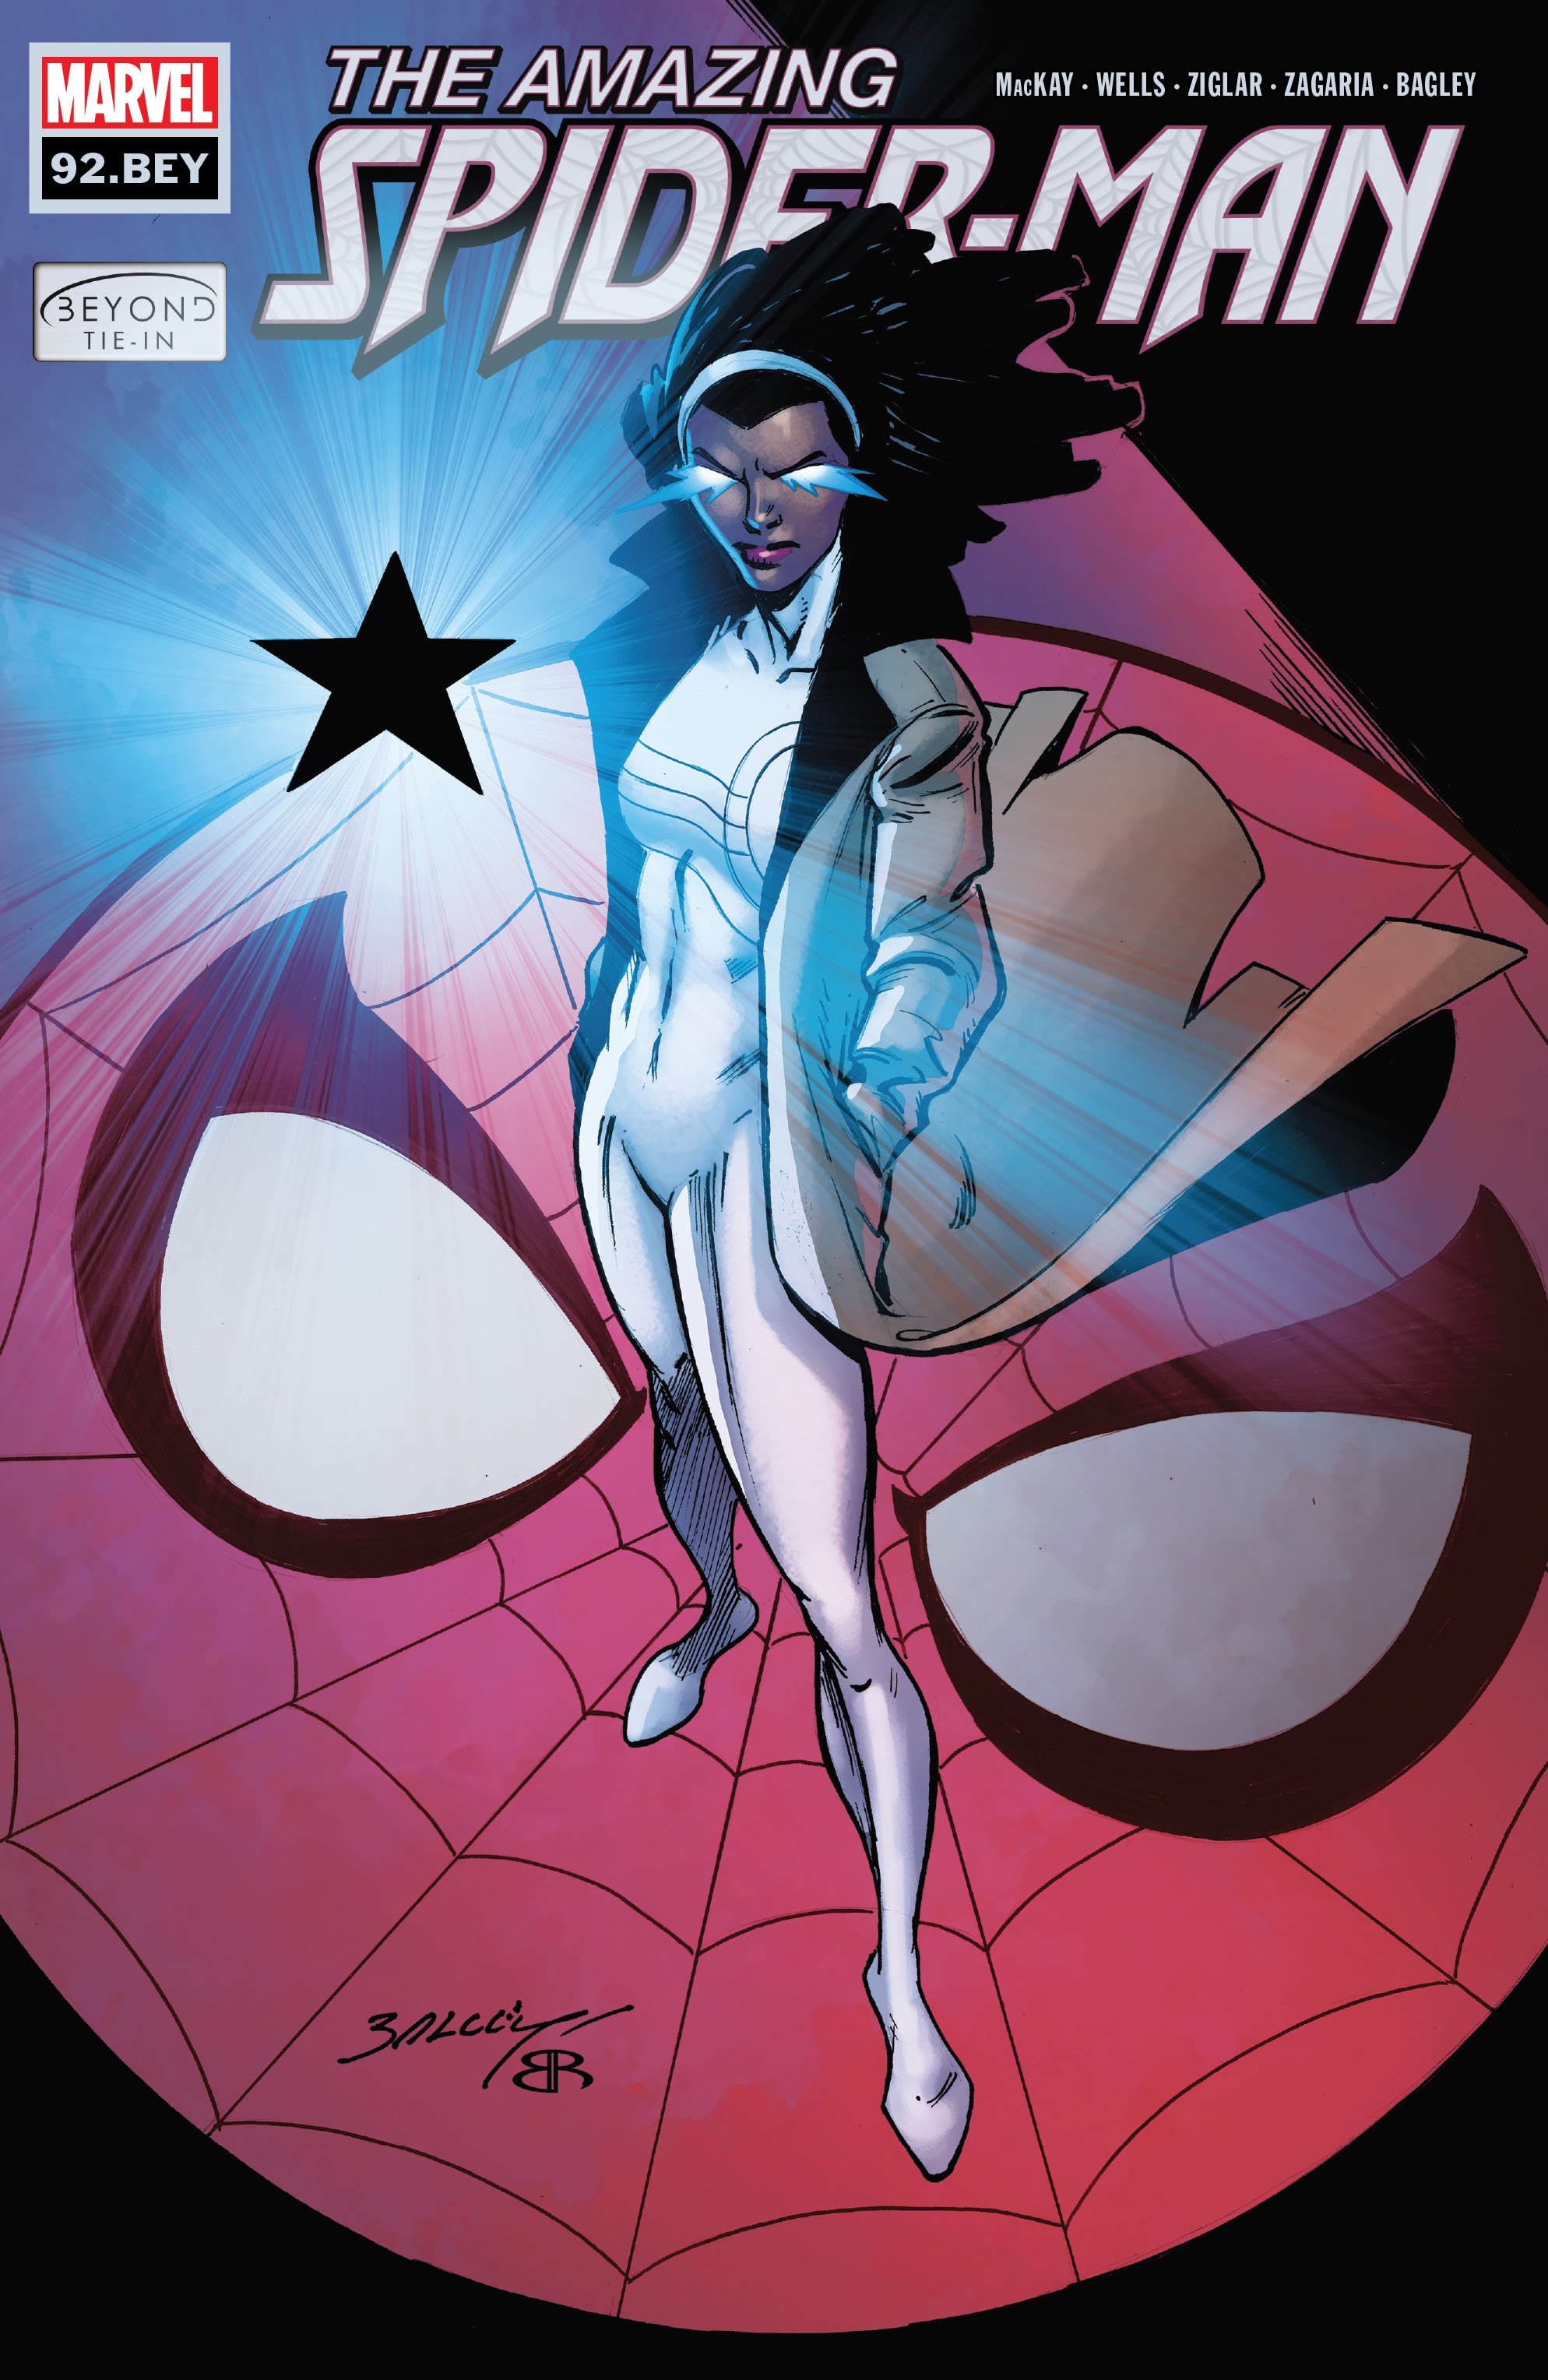 Read online The Amazing Spider-Man (2018) comic -  Issue #92.BEY - 1